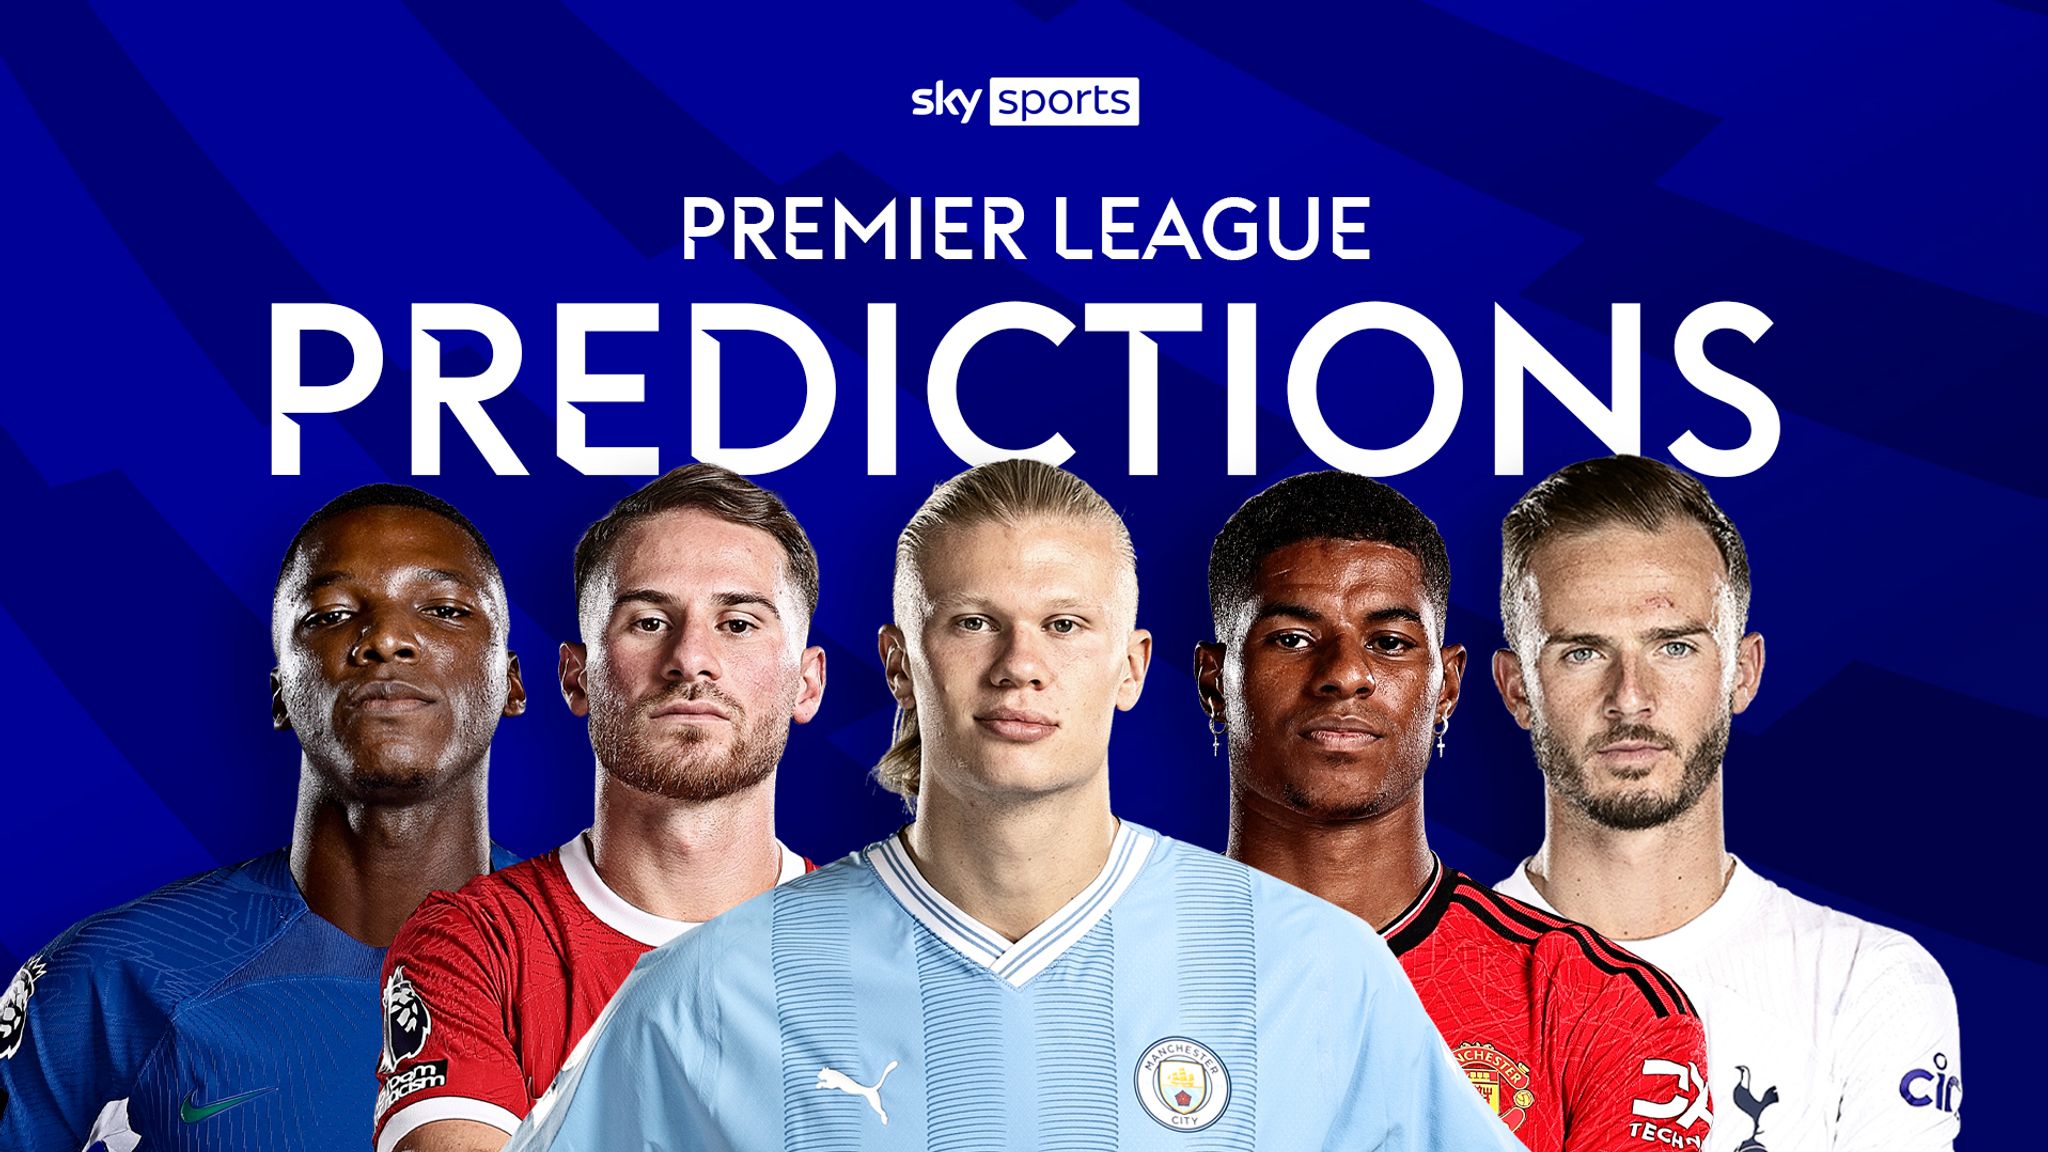 Premier League predictions: Man Utd to avoid Anfield hammering on